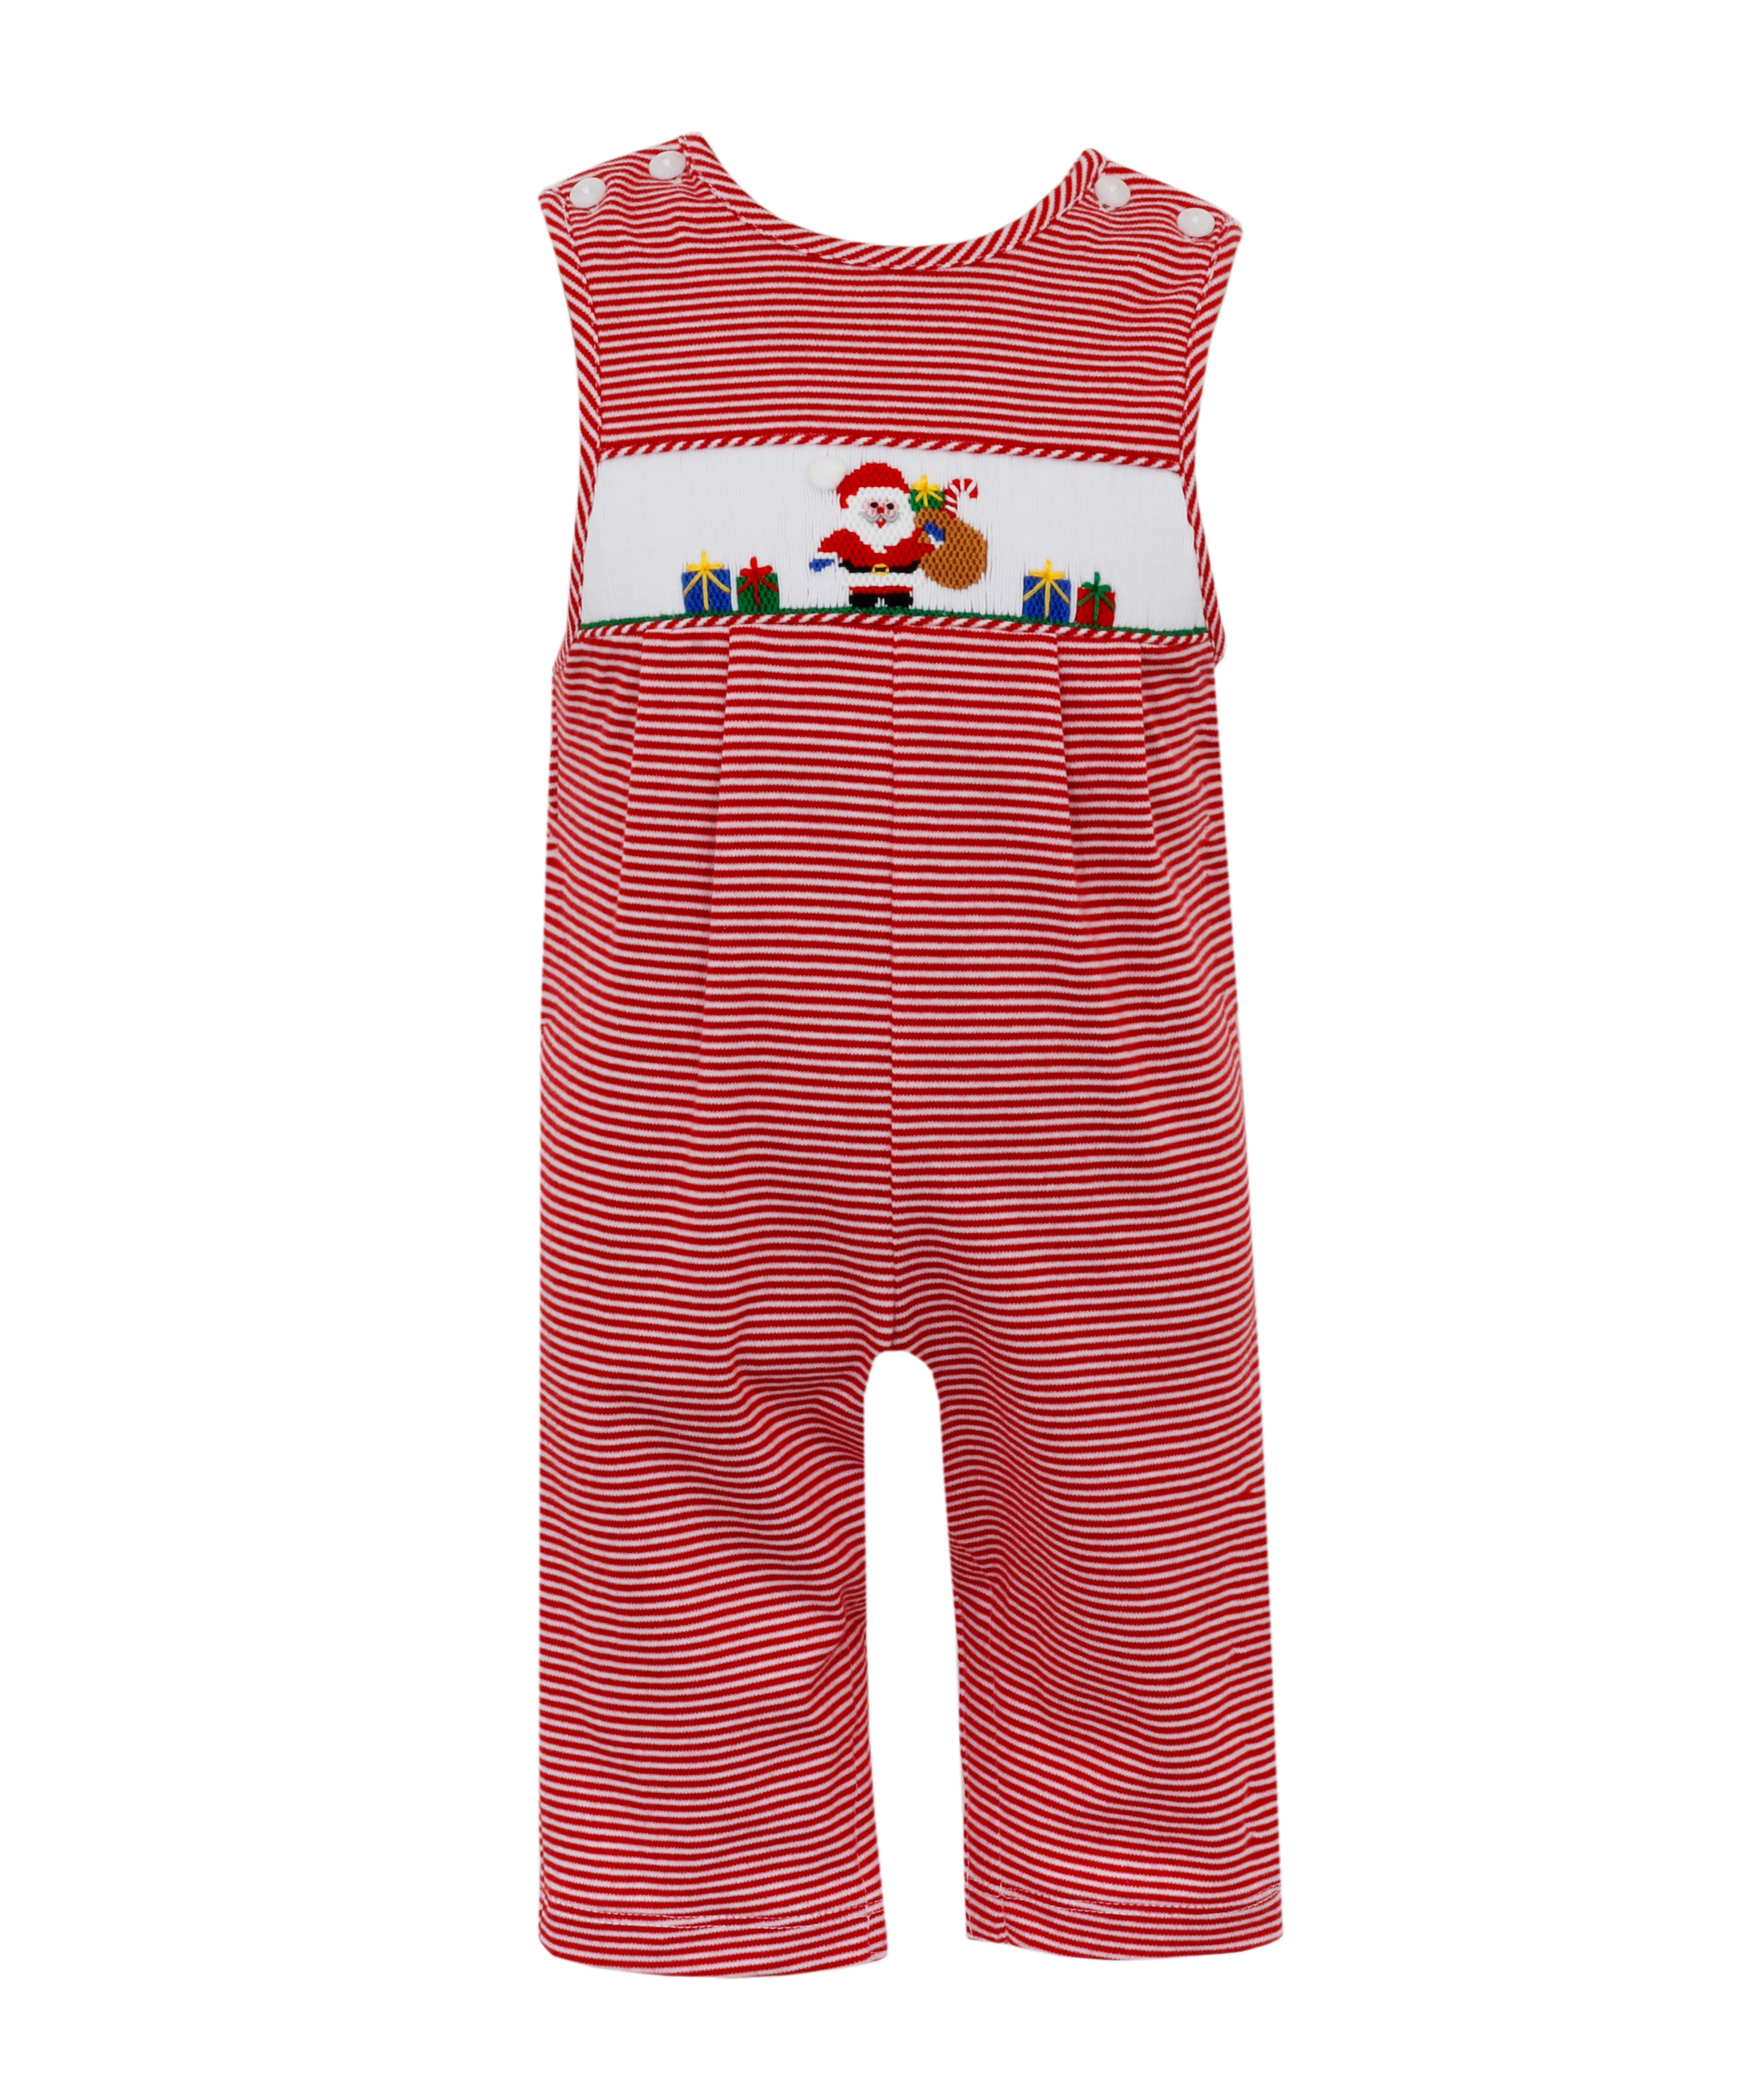 Knit Jon Jon overall smocked outfit for baby boy. Features Santa with his bag of toys and wrapped presents. Matches back with sister set in red stripe smocked Santa dress. 